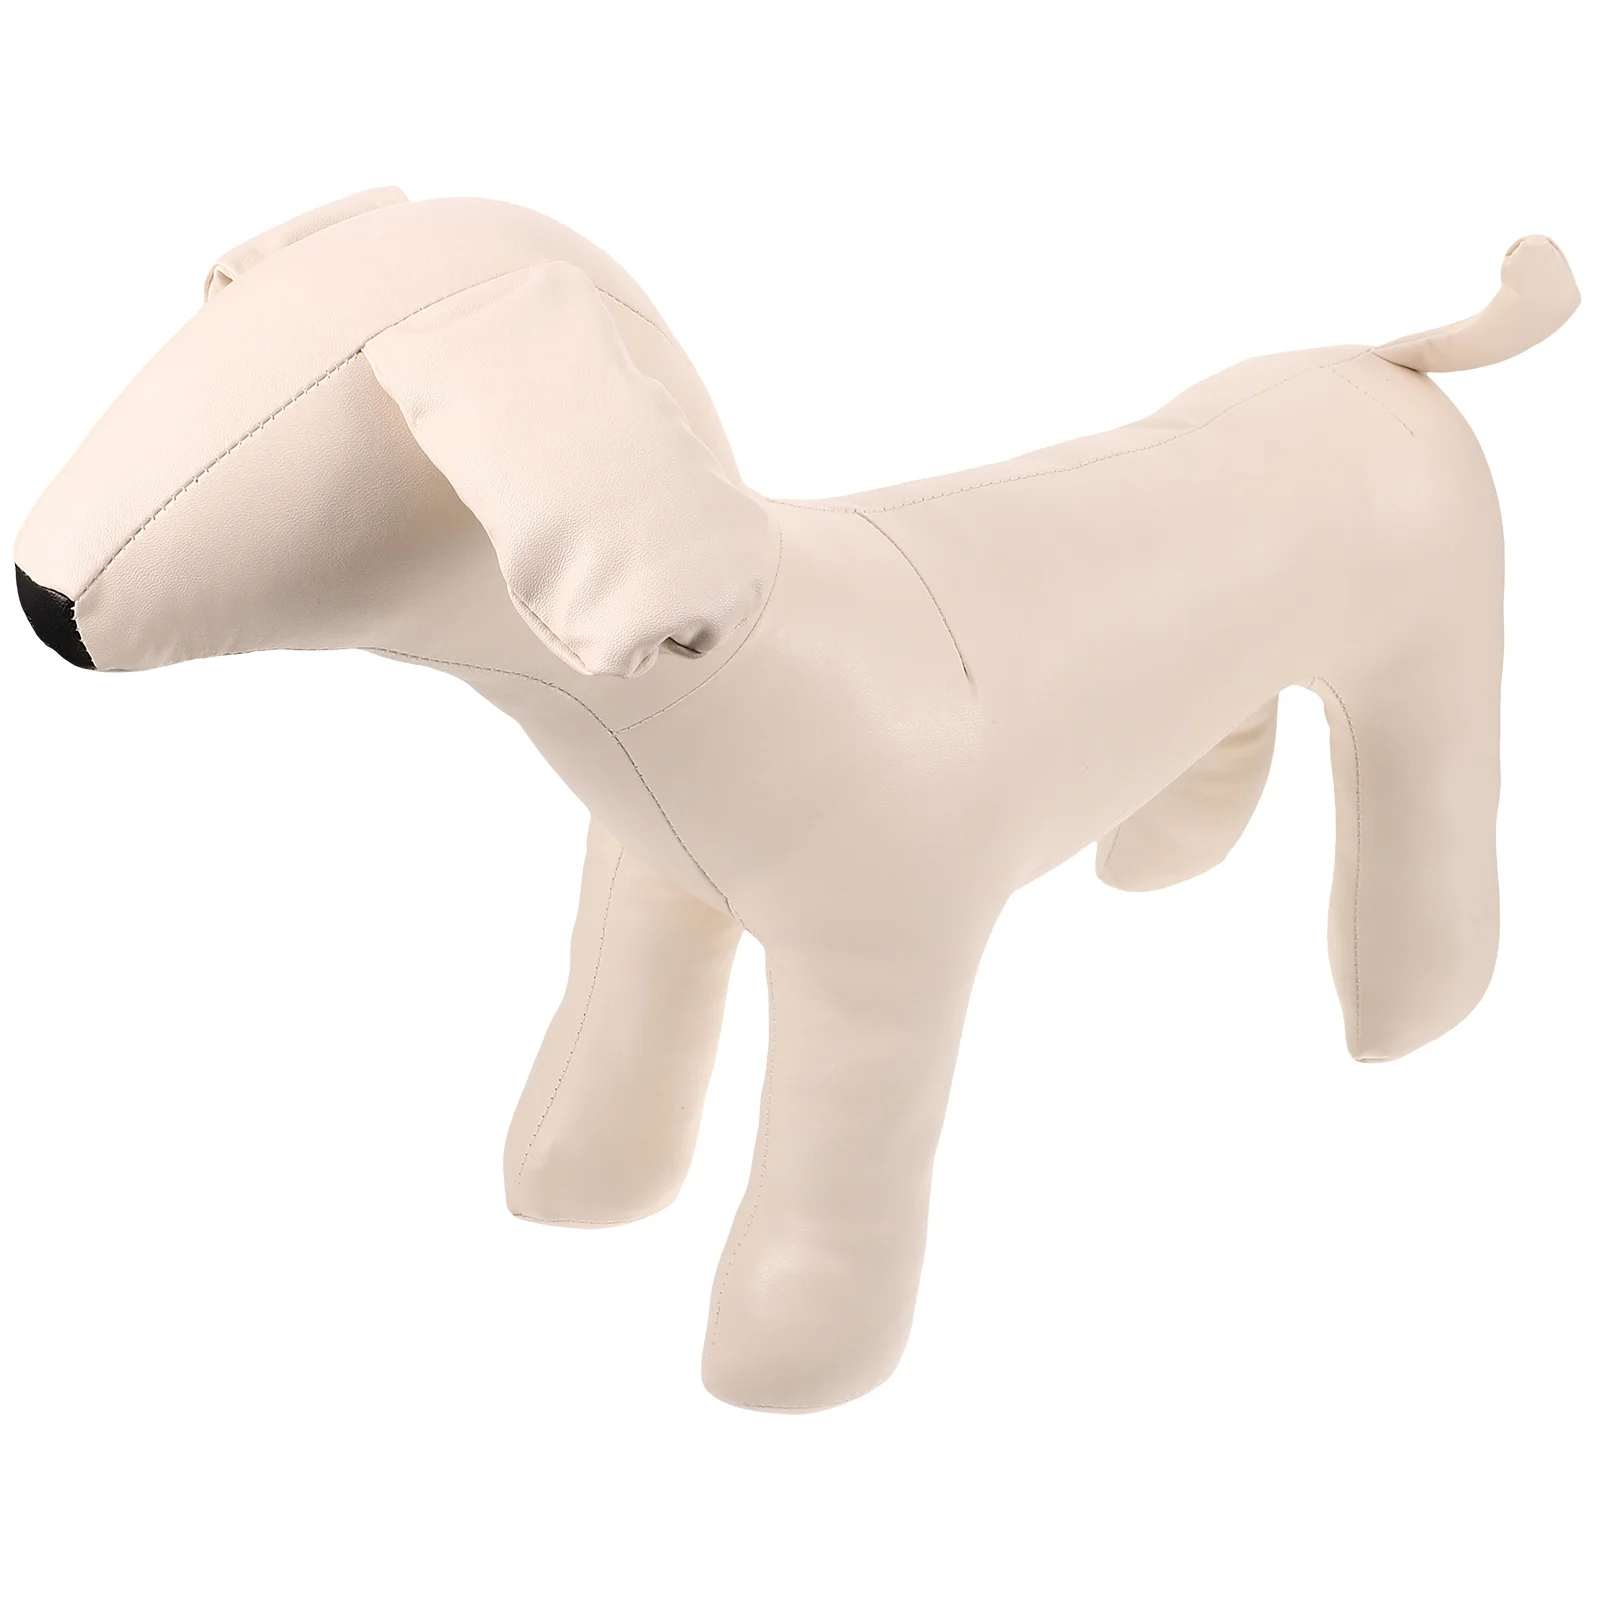 

Pet Mannequin Dog Model Professional Household Dress Form Pets Clothes Display Supply Flexible PU Simulation